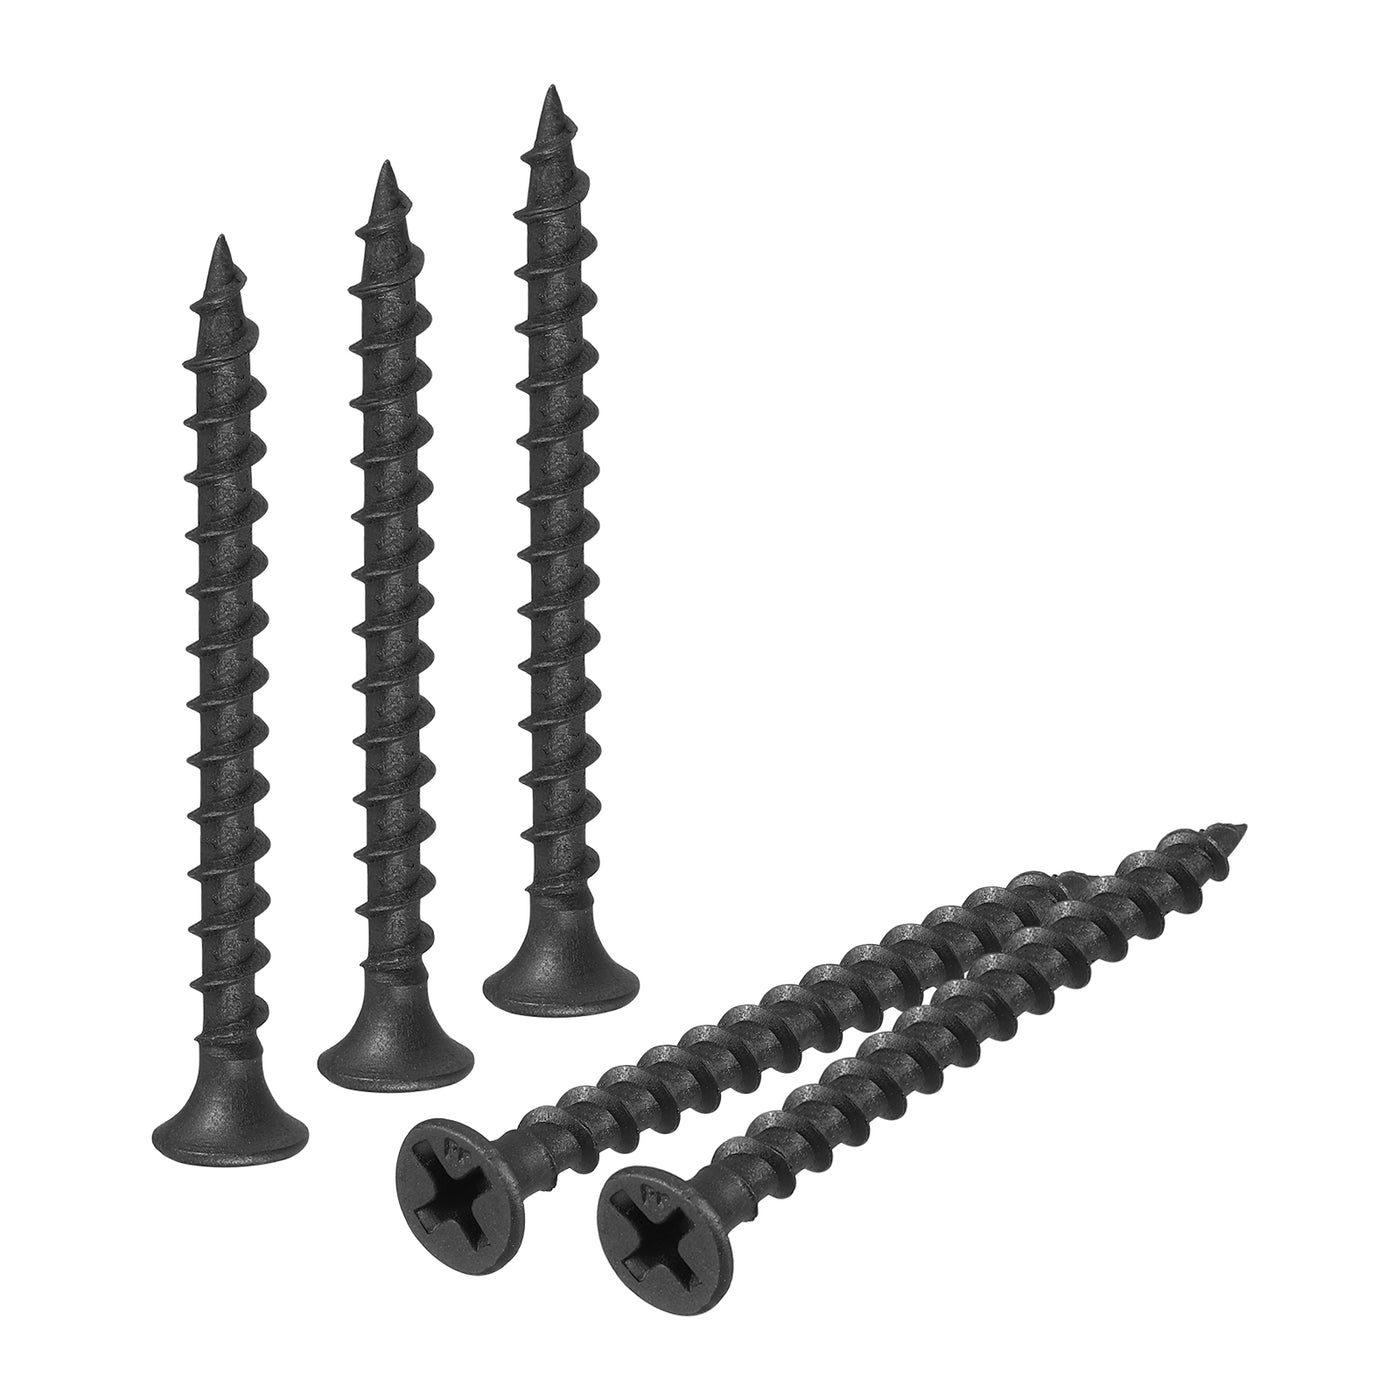 uxcell Uxcell M3.8x45mm 150pcs Phillips Drive Wood Screws, Carbon Steel Self Tapping Screws